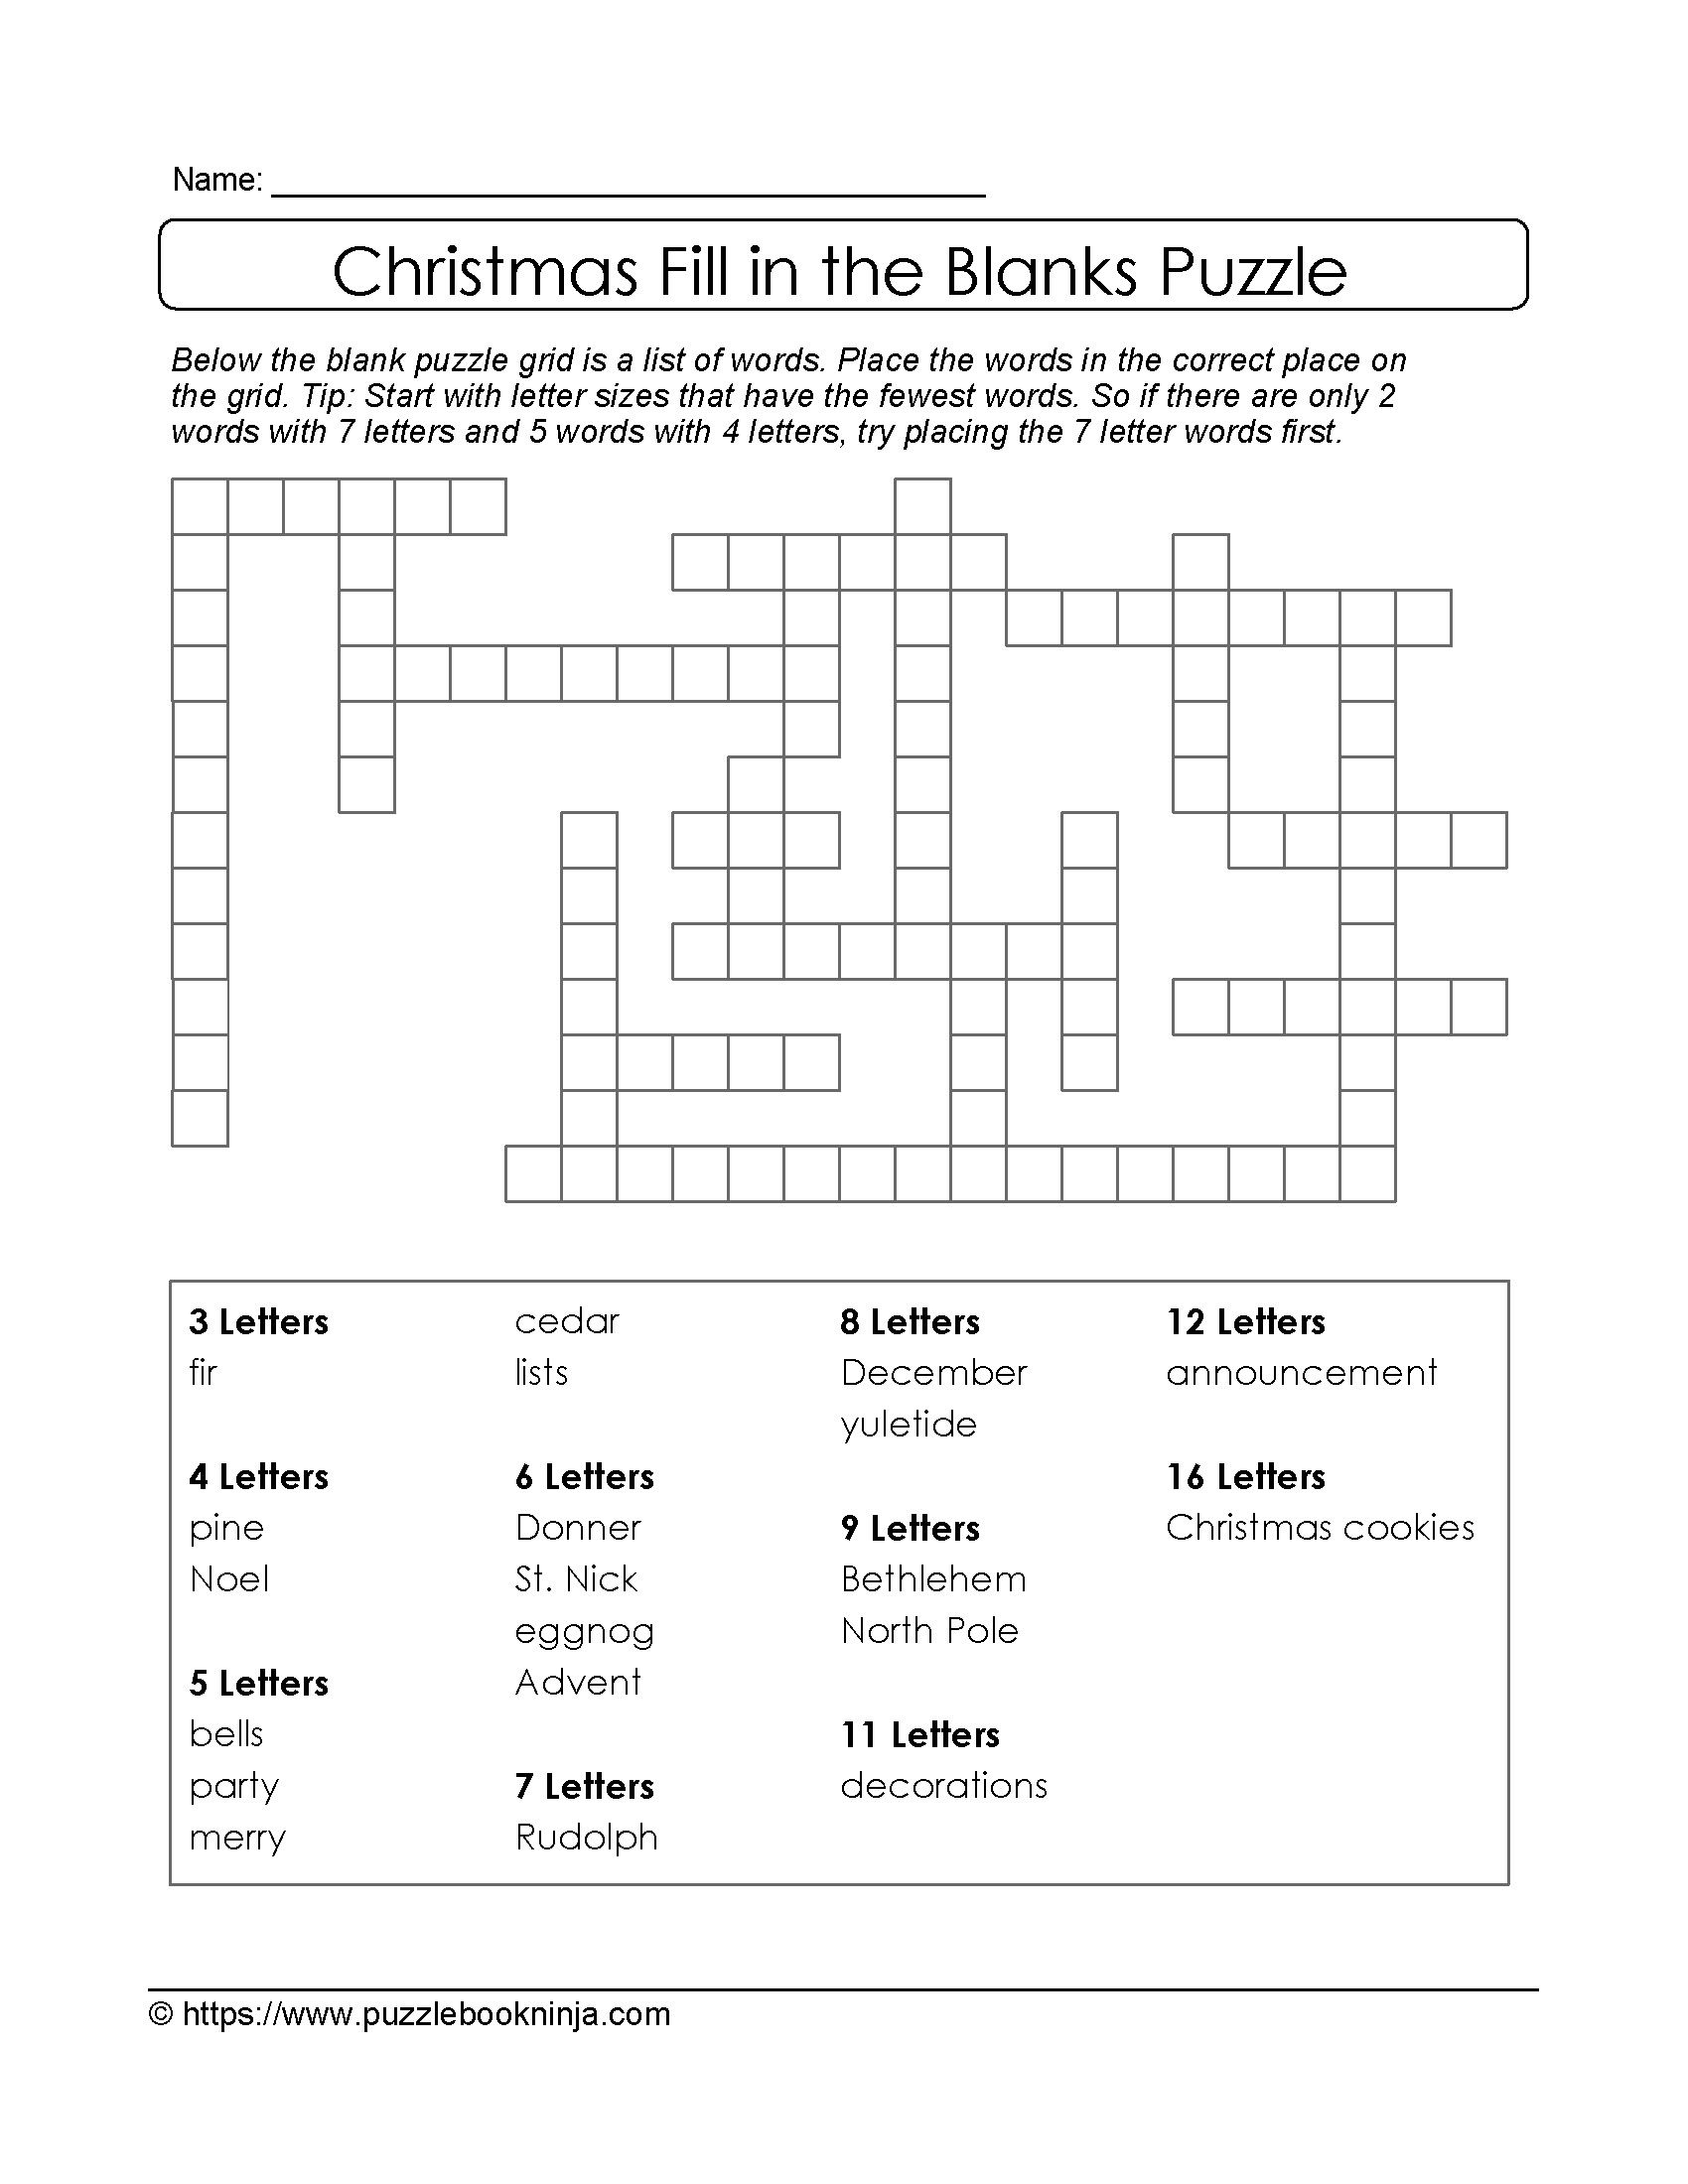 Christmas Printable Puzzle. Free Fill In The Blanks. | Christmas - Printable Xmas Crossword Puzzles